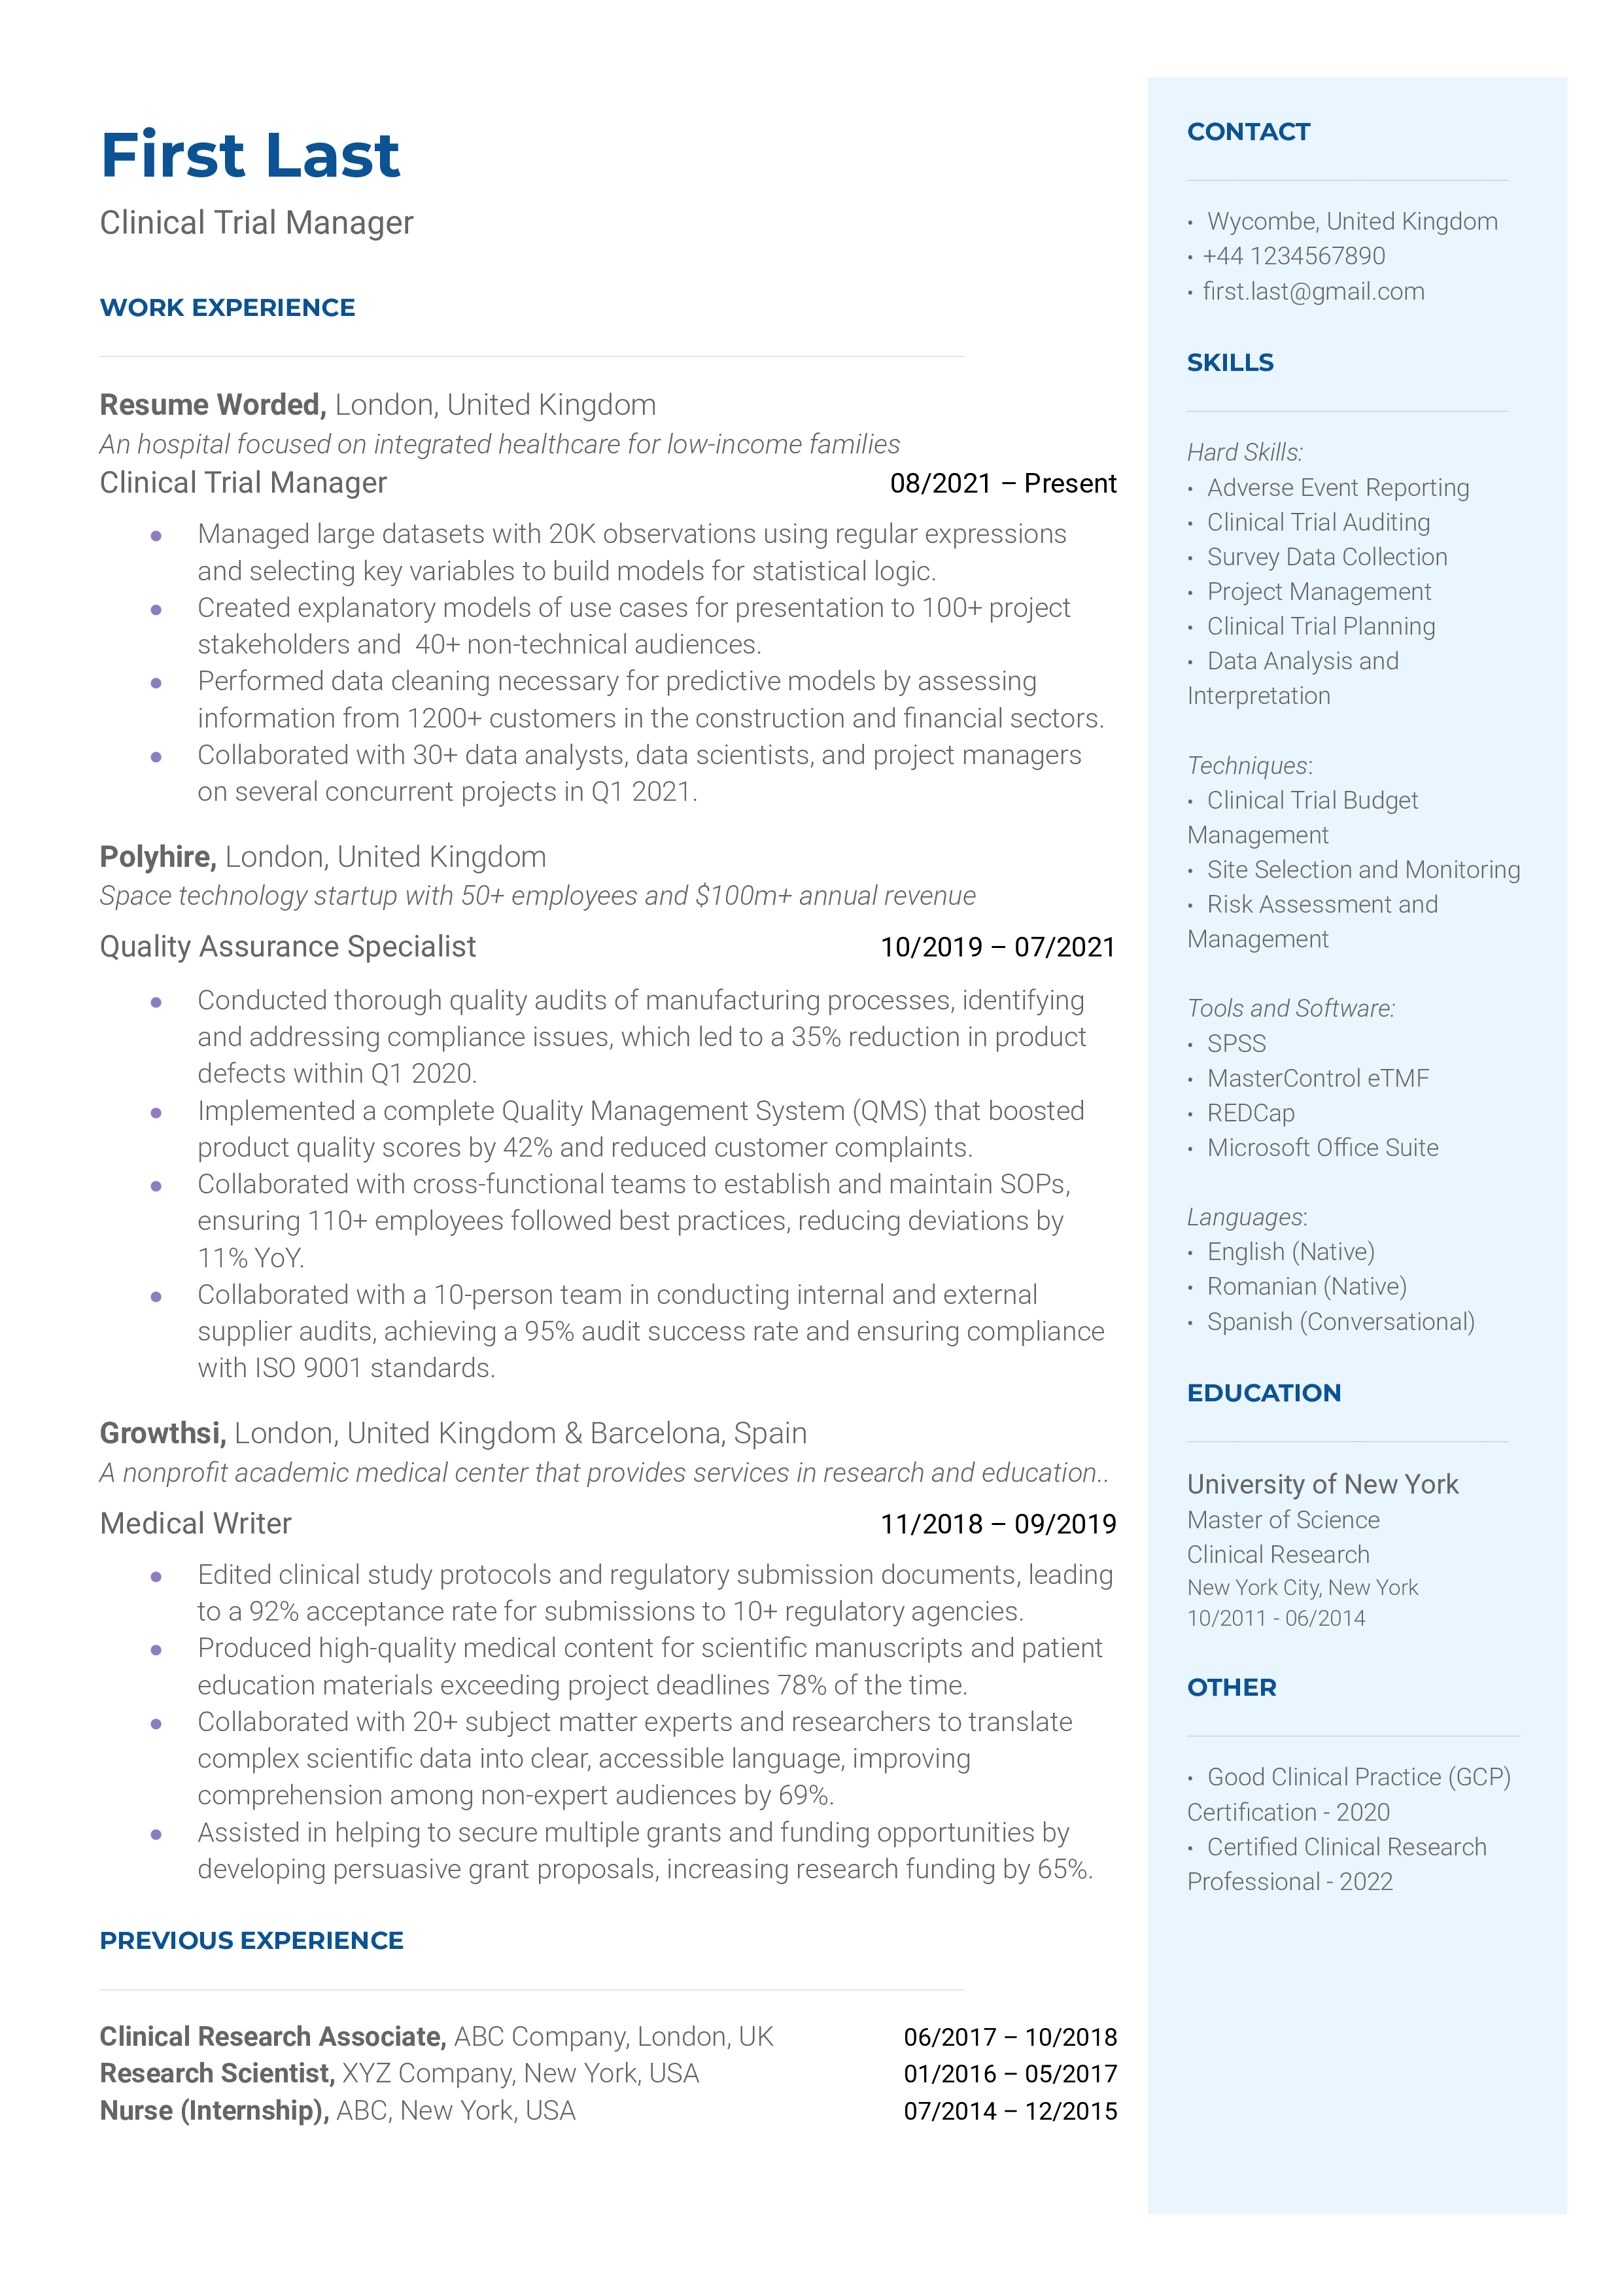 Clinical Trial Manager Resume Sample